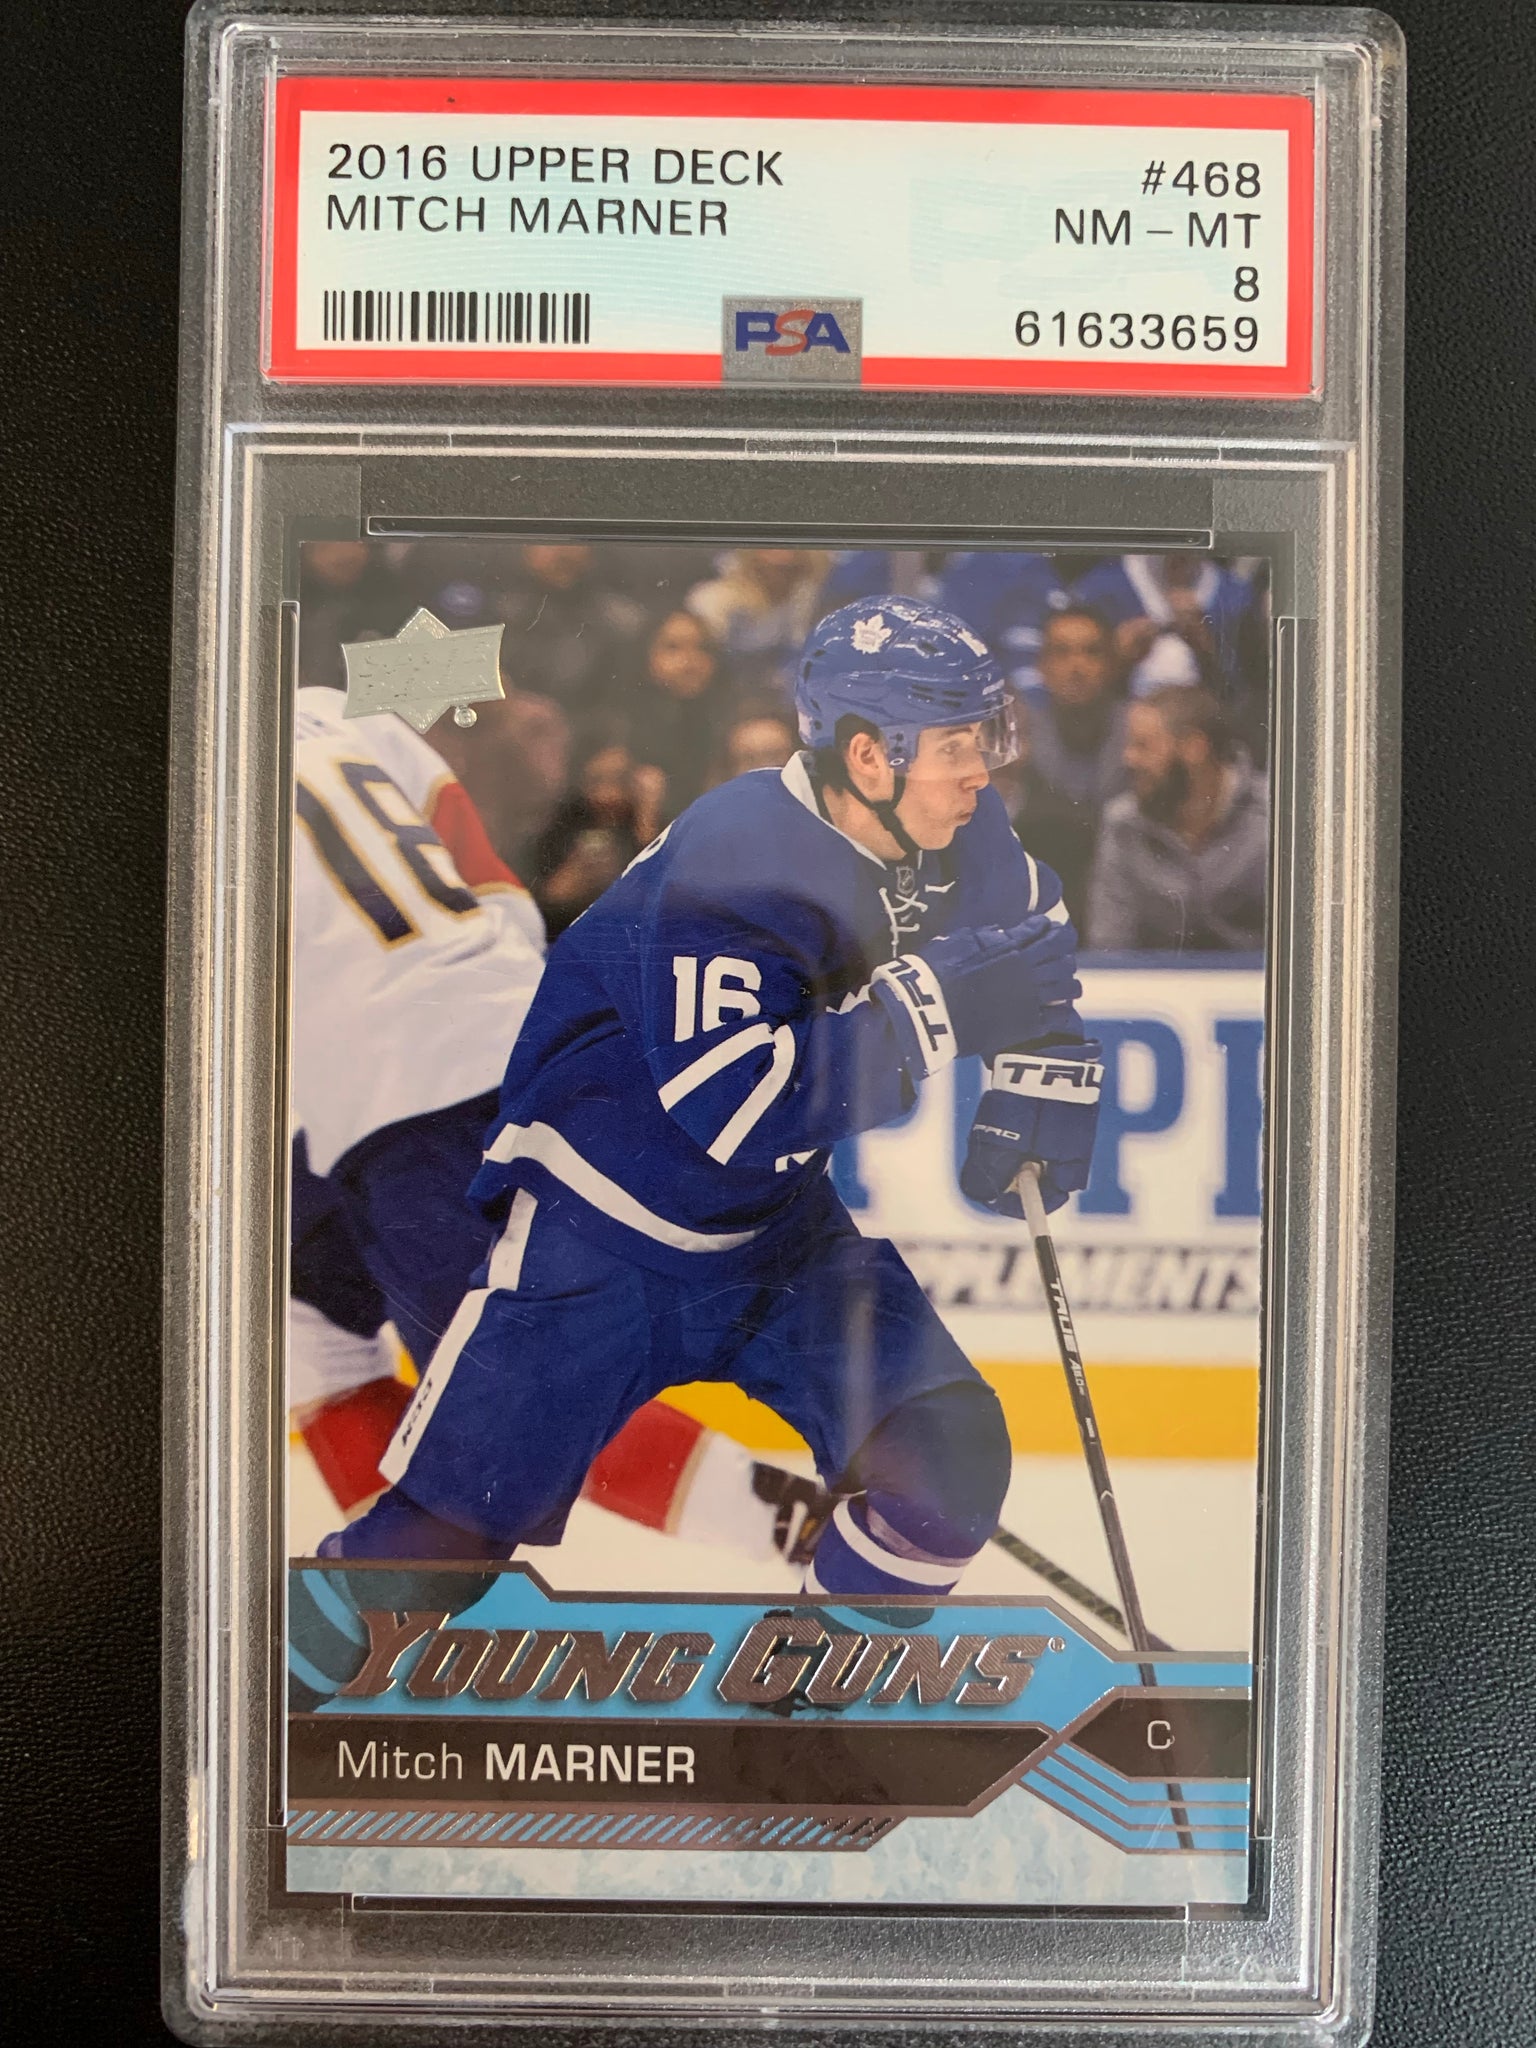 2016-17 UPPER DECK HOCKEY #468 TORONTO MAPLE LEAFS - MITCH MARNER YOUNG GUNS ROOKIE CARD GRADED PSA 8 NM-MT